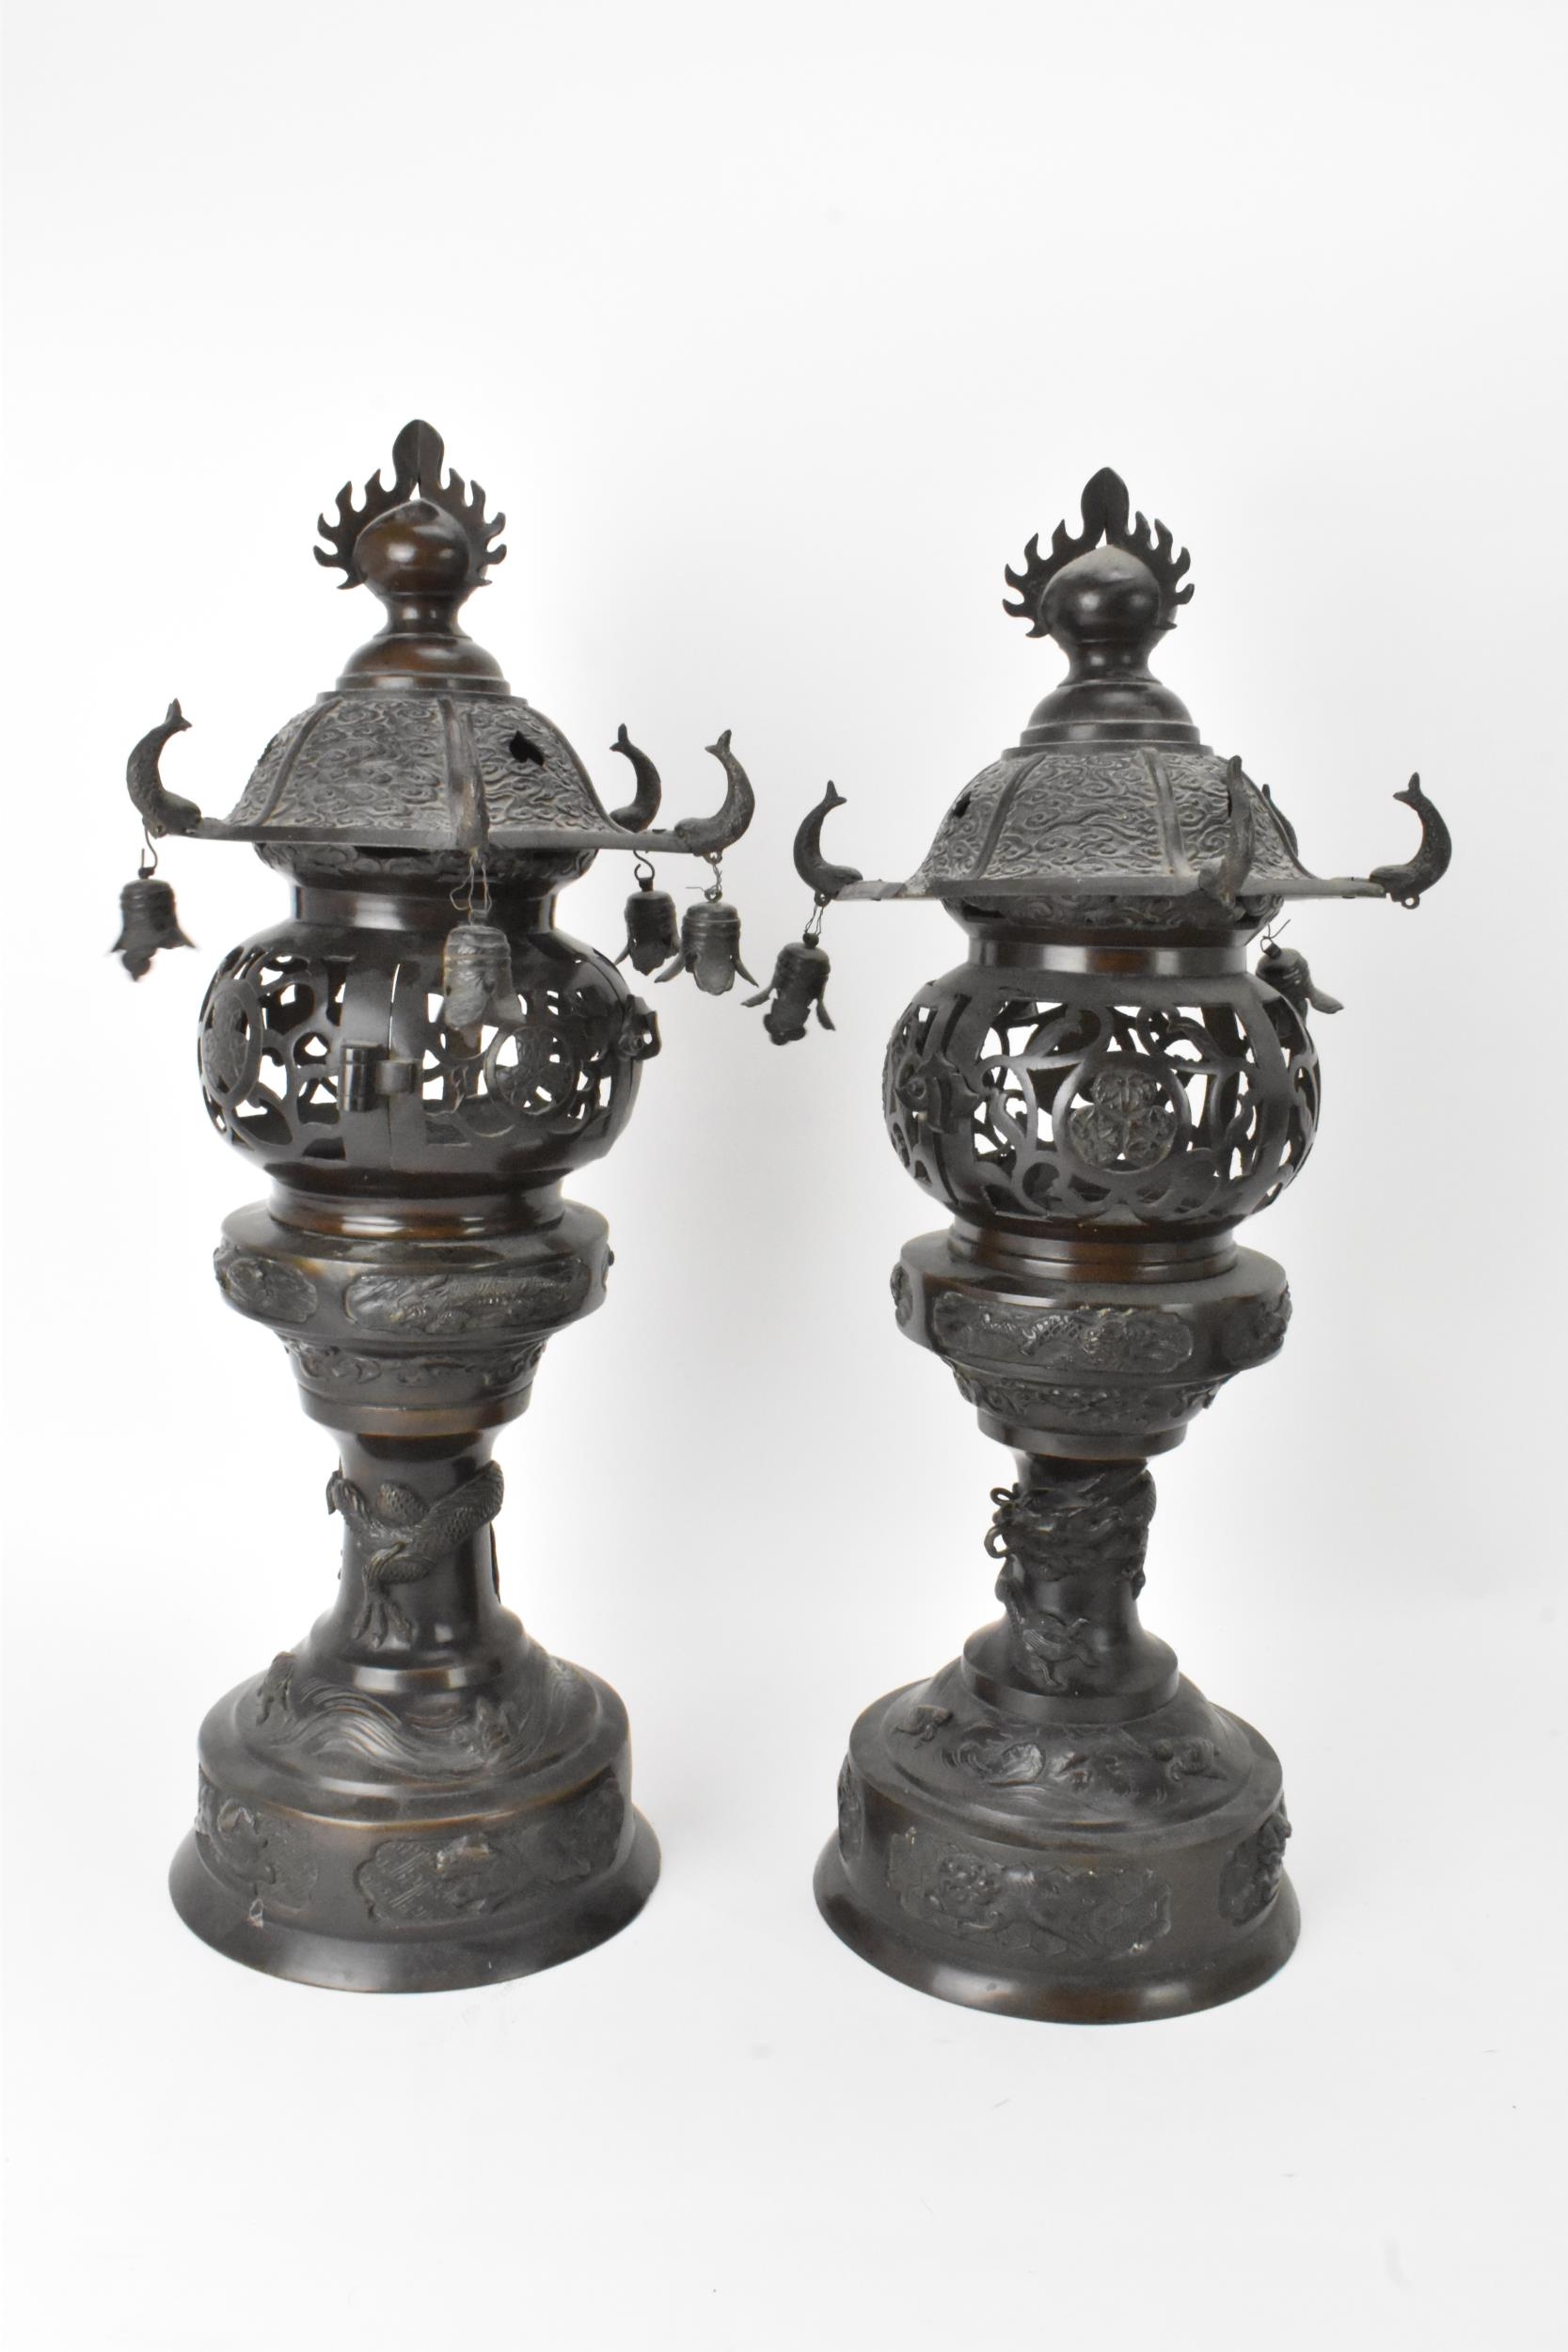 A pair of Japanese Meiji period bronze koros in the form of temples with pagoda roof with bells, - Image 5 of 7